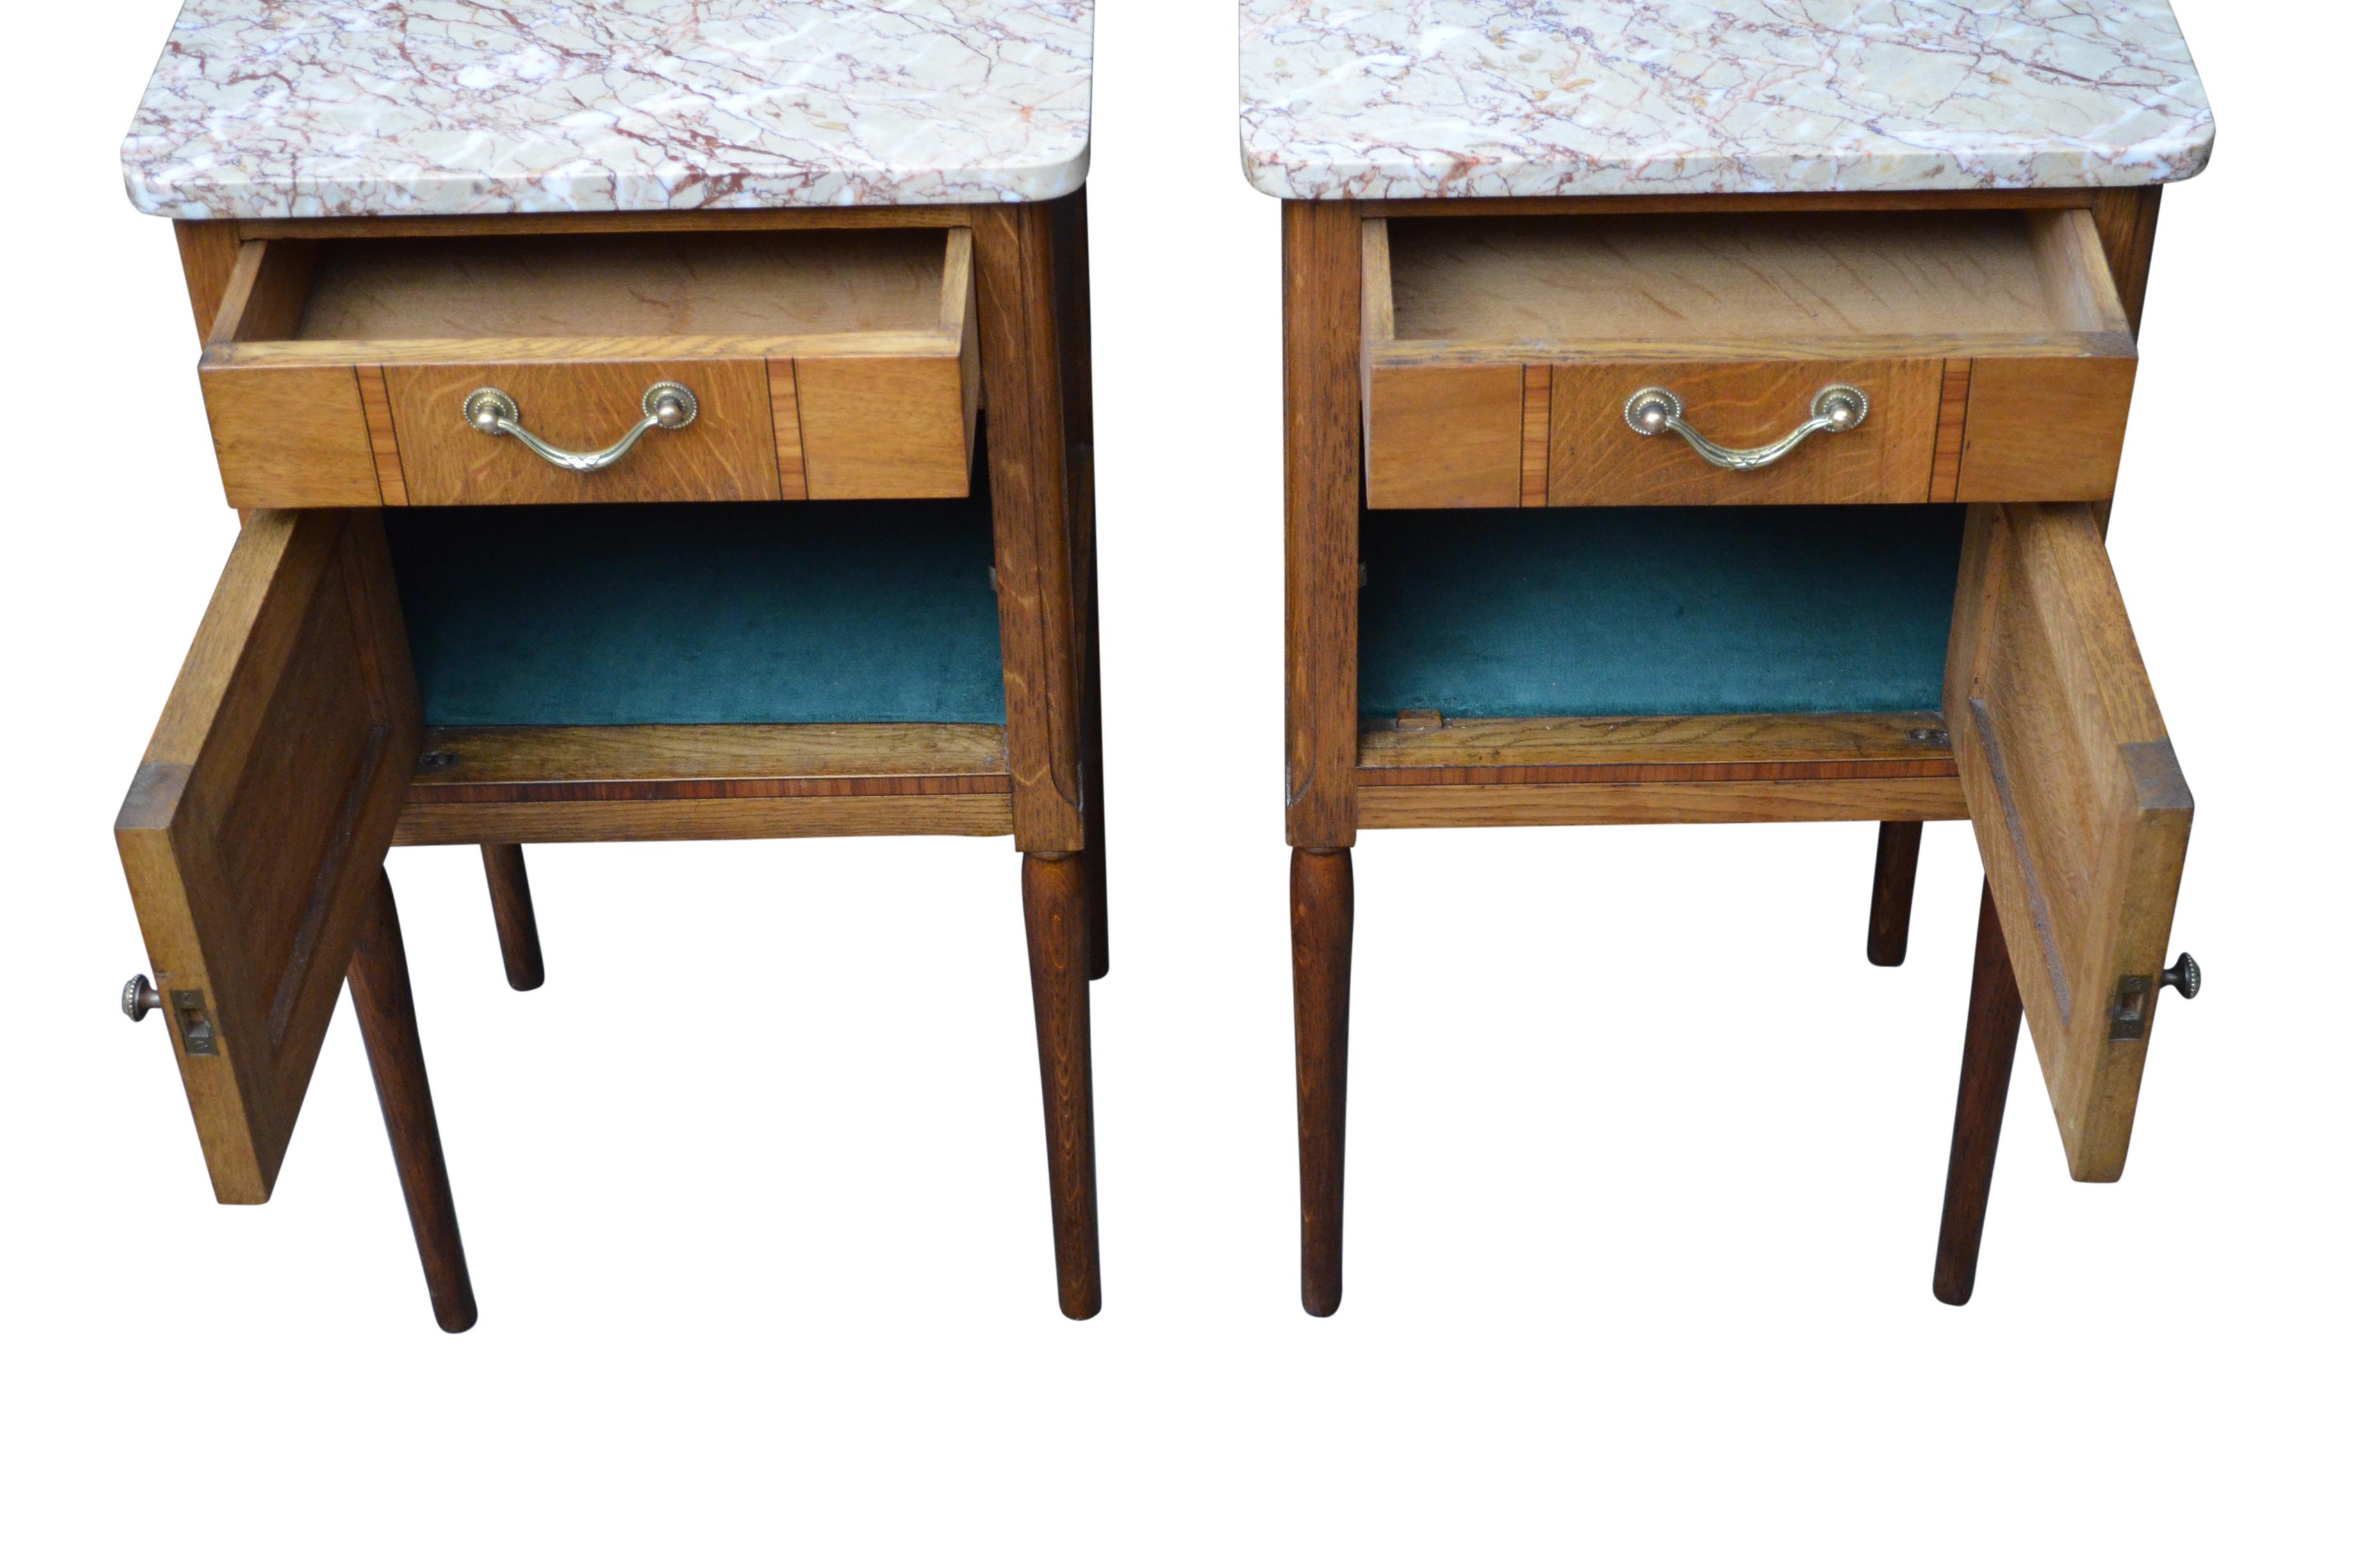 Early 20th Century Pair of Turn of the Century Bedside Cabinets in Oak